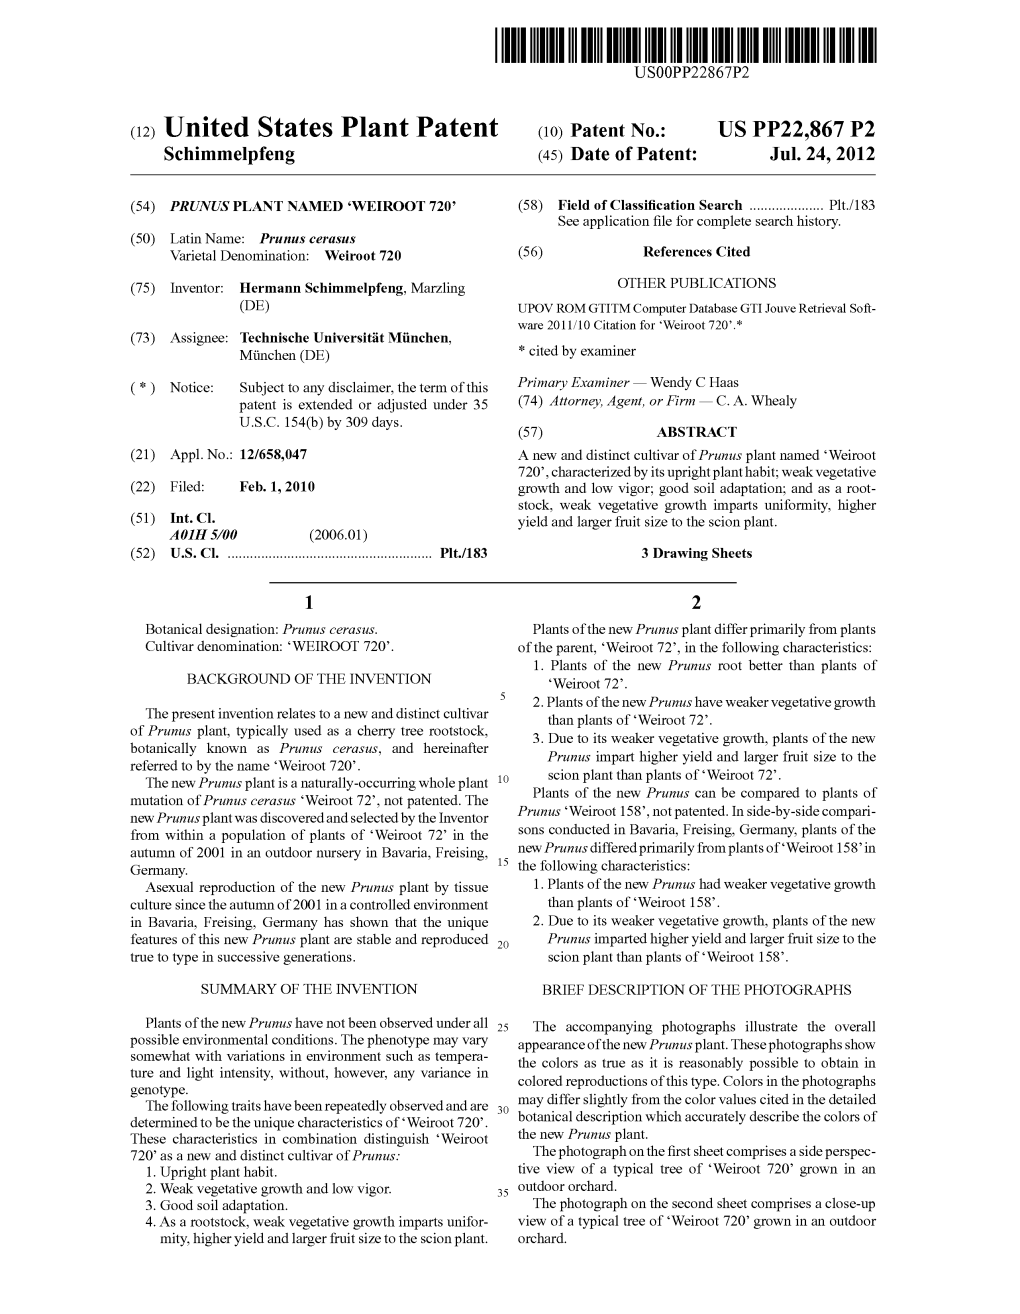 (12) United States Plant Patent (10) Patent N0.: US PP22,867 P2 Schimmelpfeng (45) Date of Patent: Jul